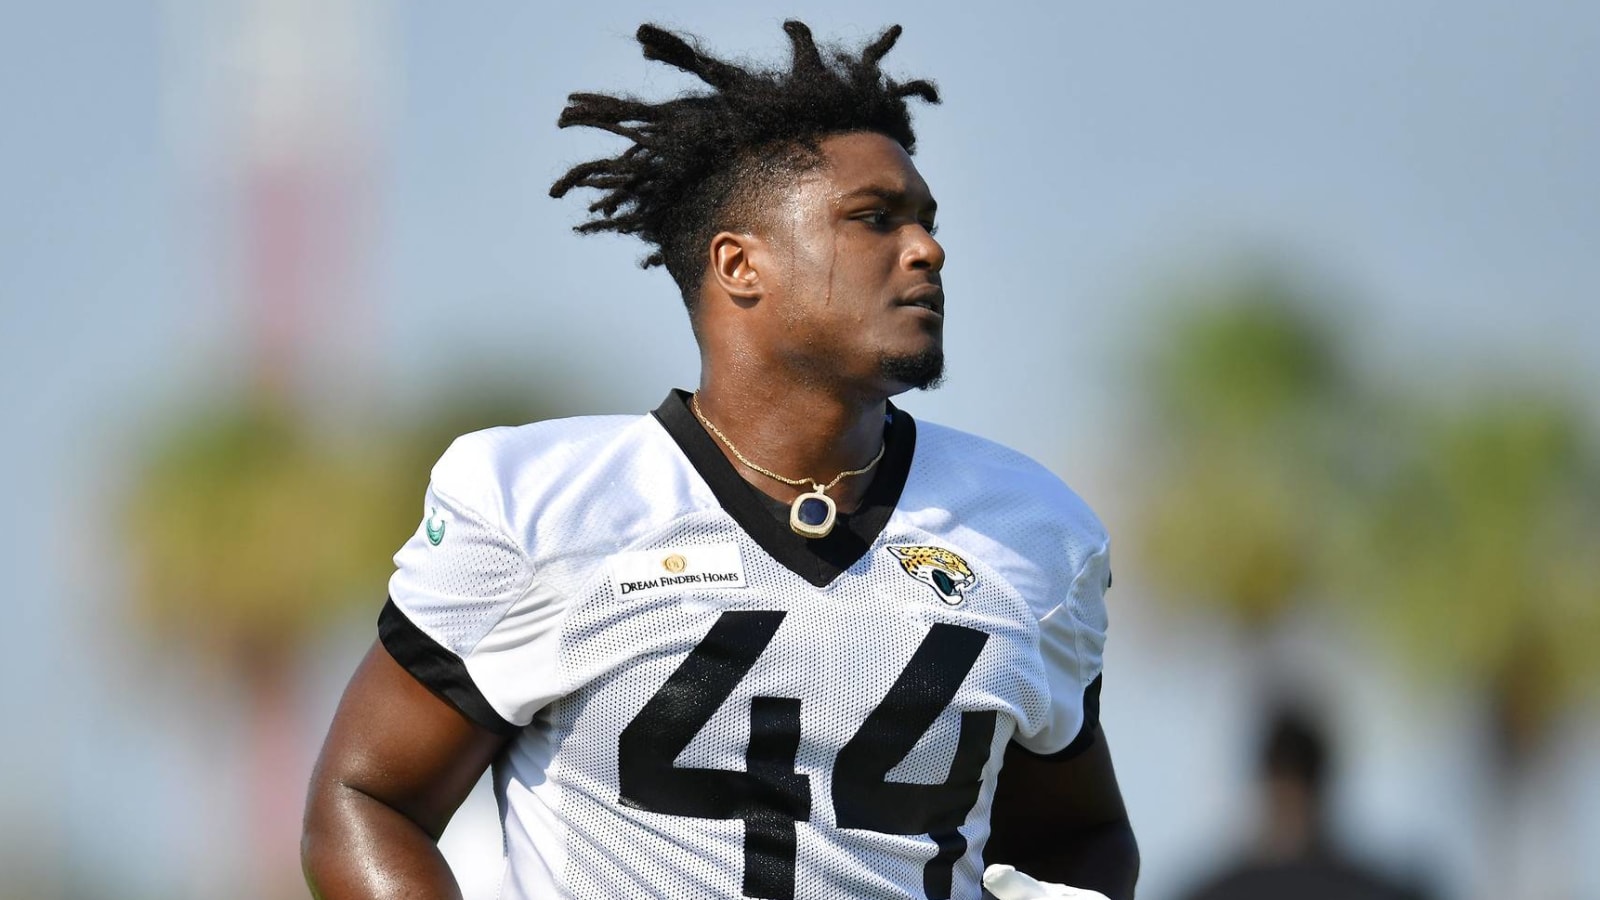 Myles Jack after taunting fine: 'I'm done talking'